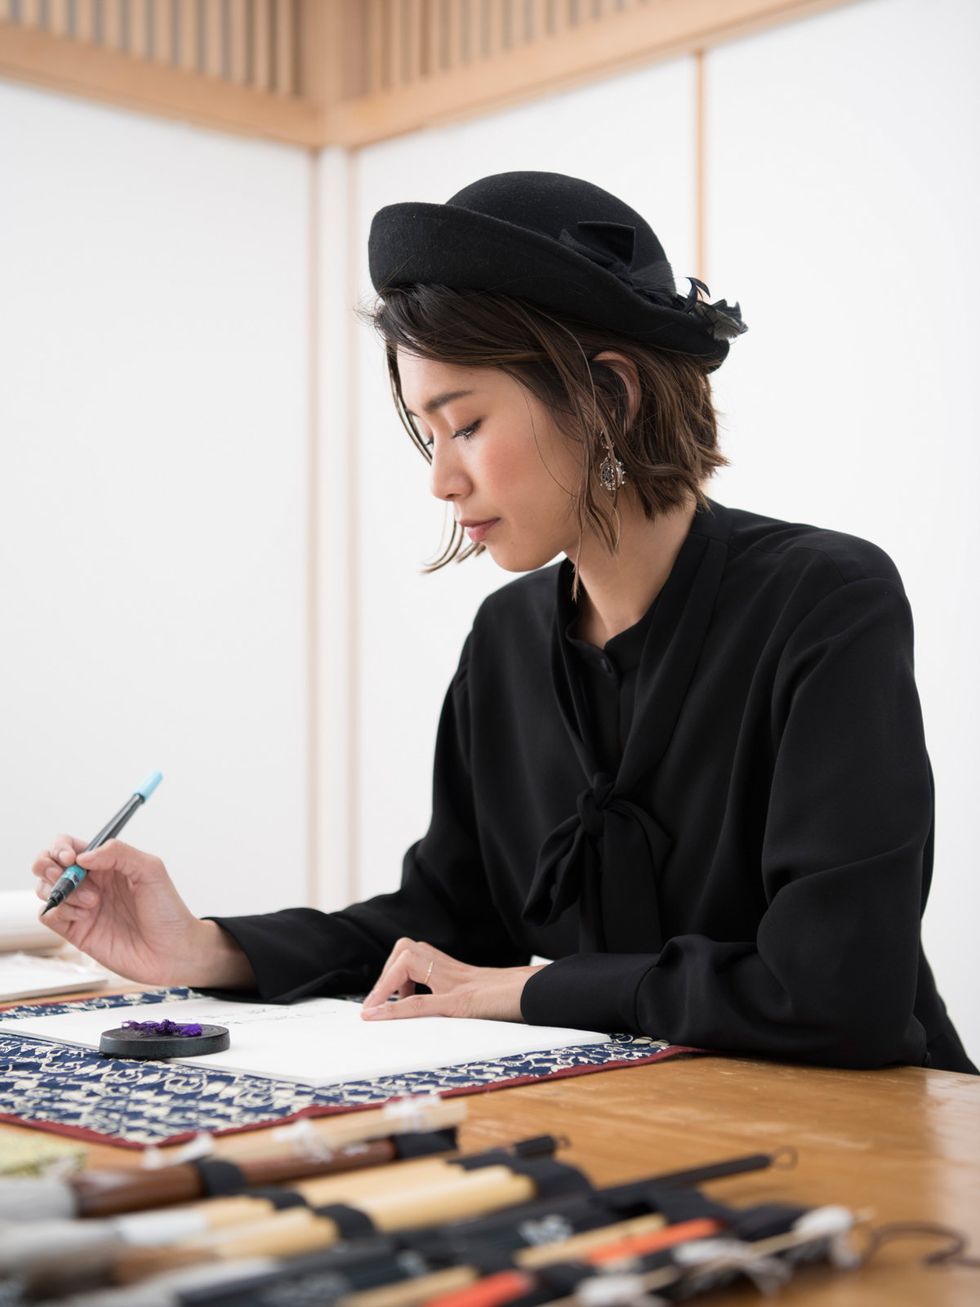 Hand, Hat, Writing implement, Table, Stationery, Fashion accessory, Headgear, Pen, Desk, Office supplies, 